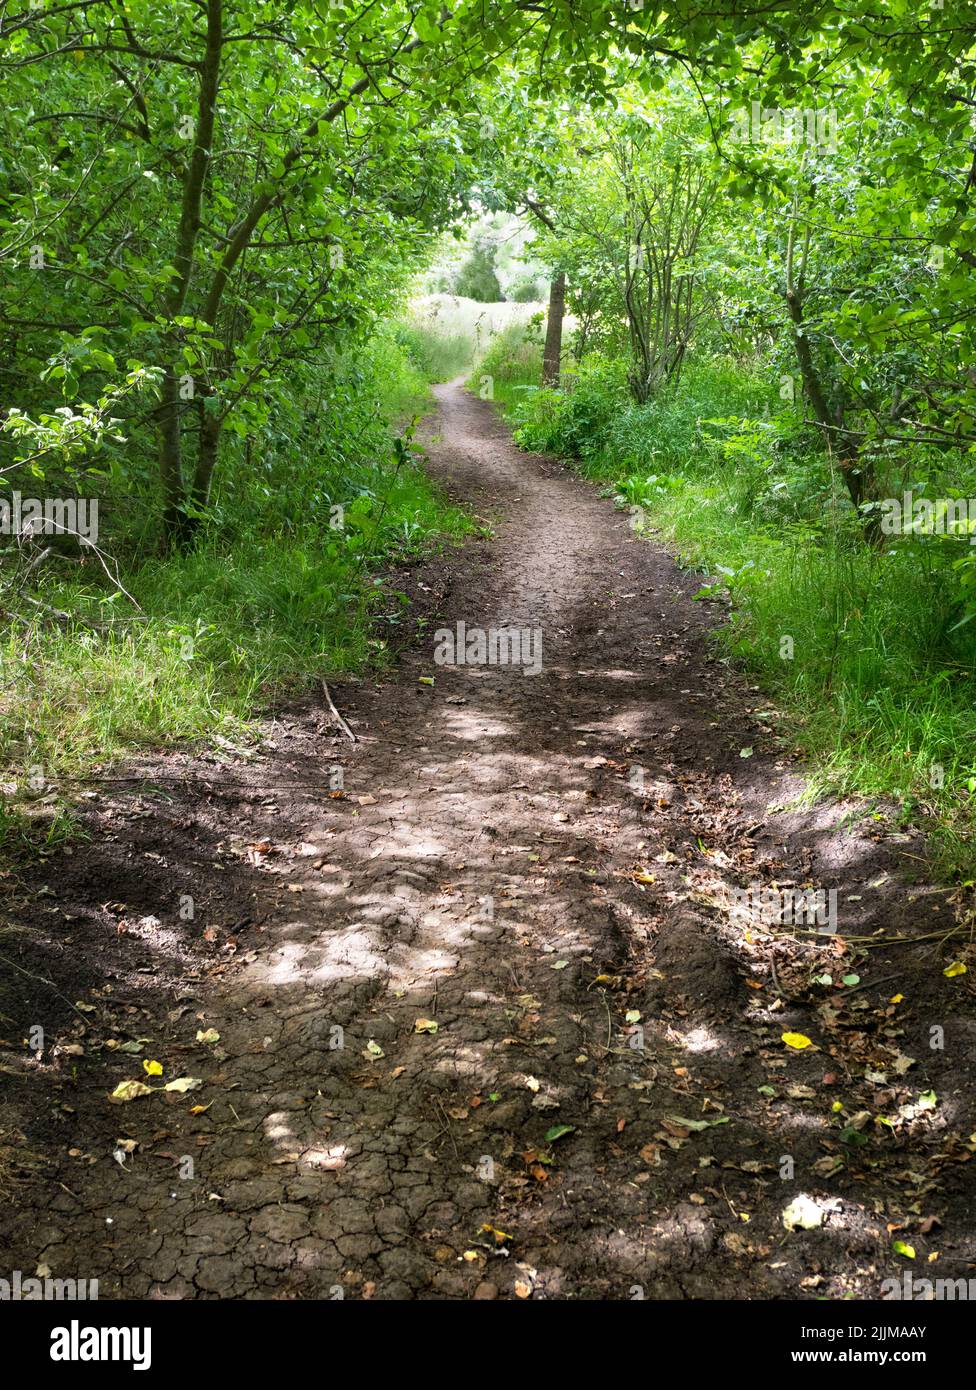 This delightful footpath leads from lower Radley Village to the River Thames as it wends its way through rural Oxfordshire. Stock Photo